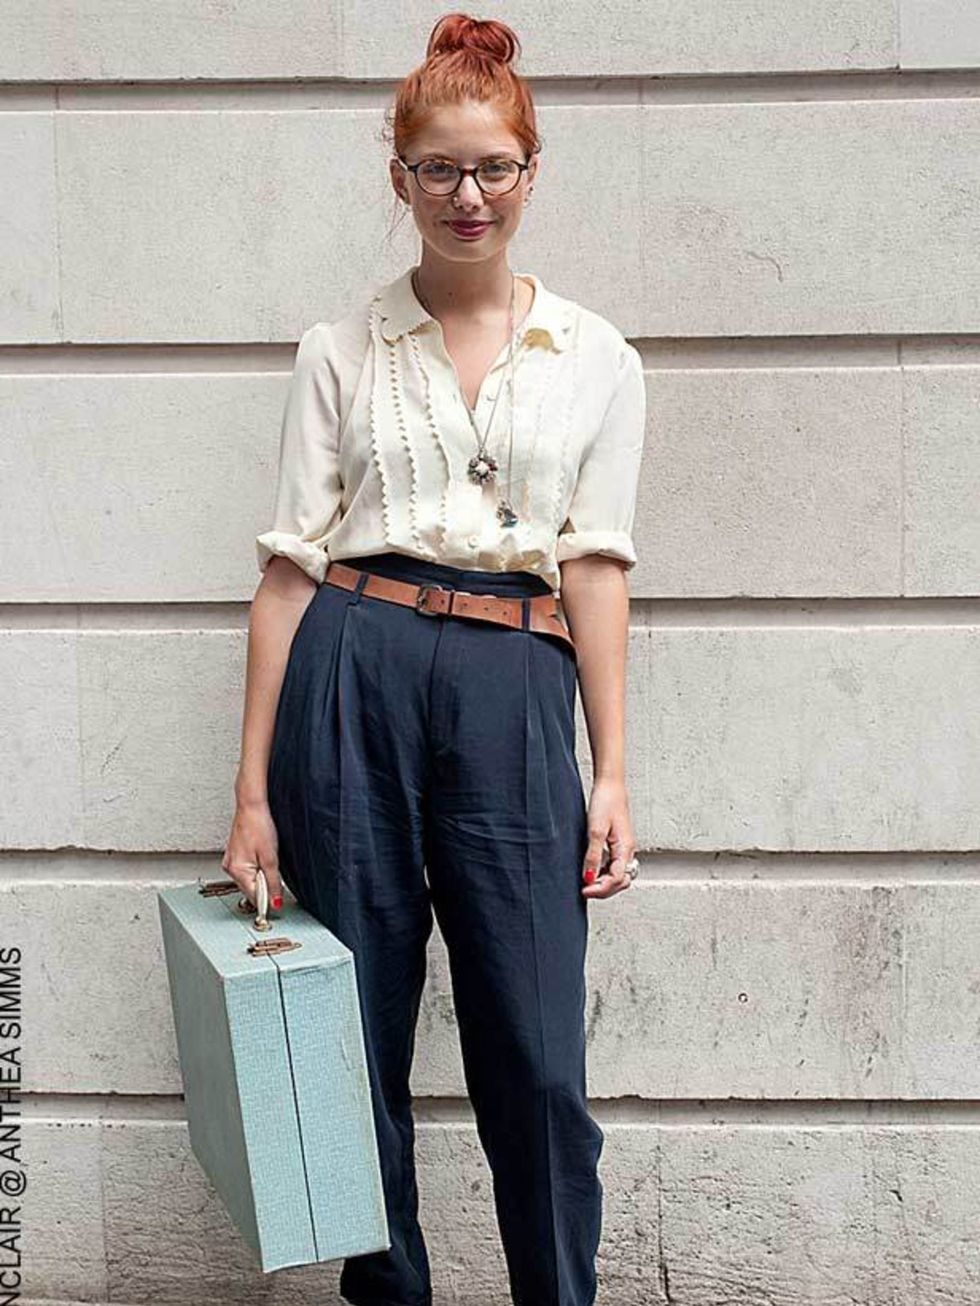 <p>Olivia, 19, Student. Blouse and picnic case vintage, belt and trousers by Zara, glasses by Ralph Lauren, shoes by Primark. </p>